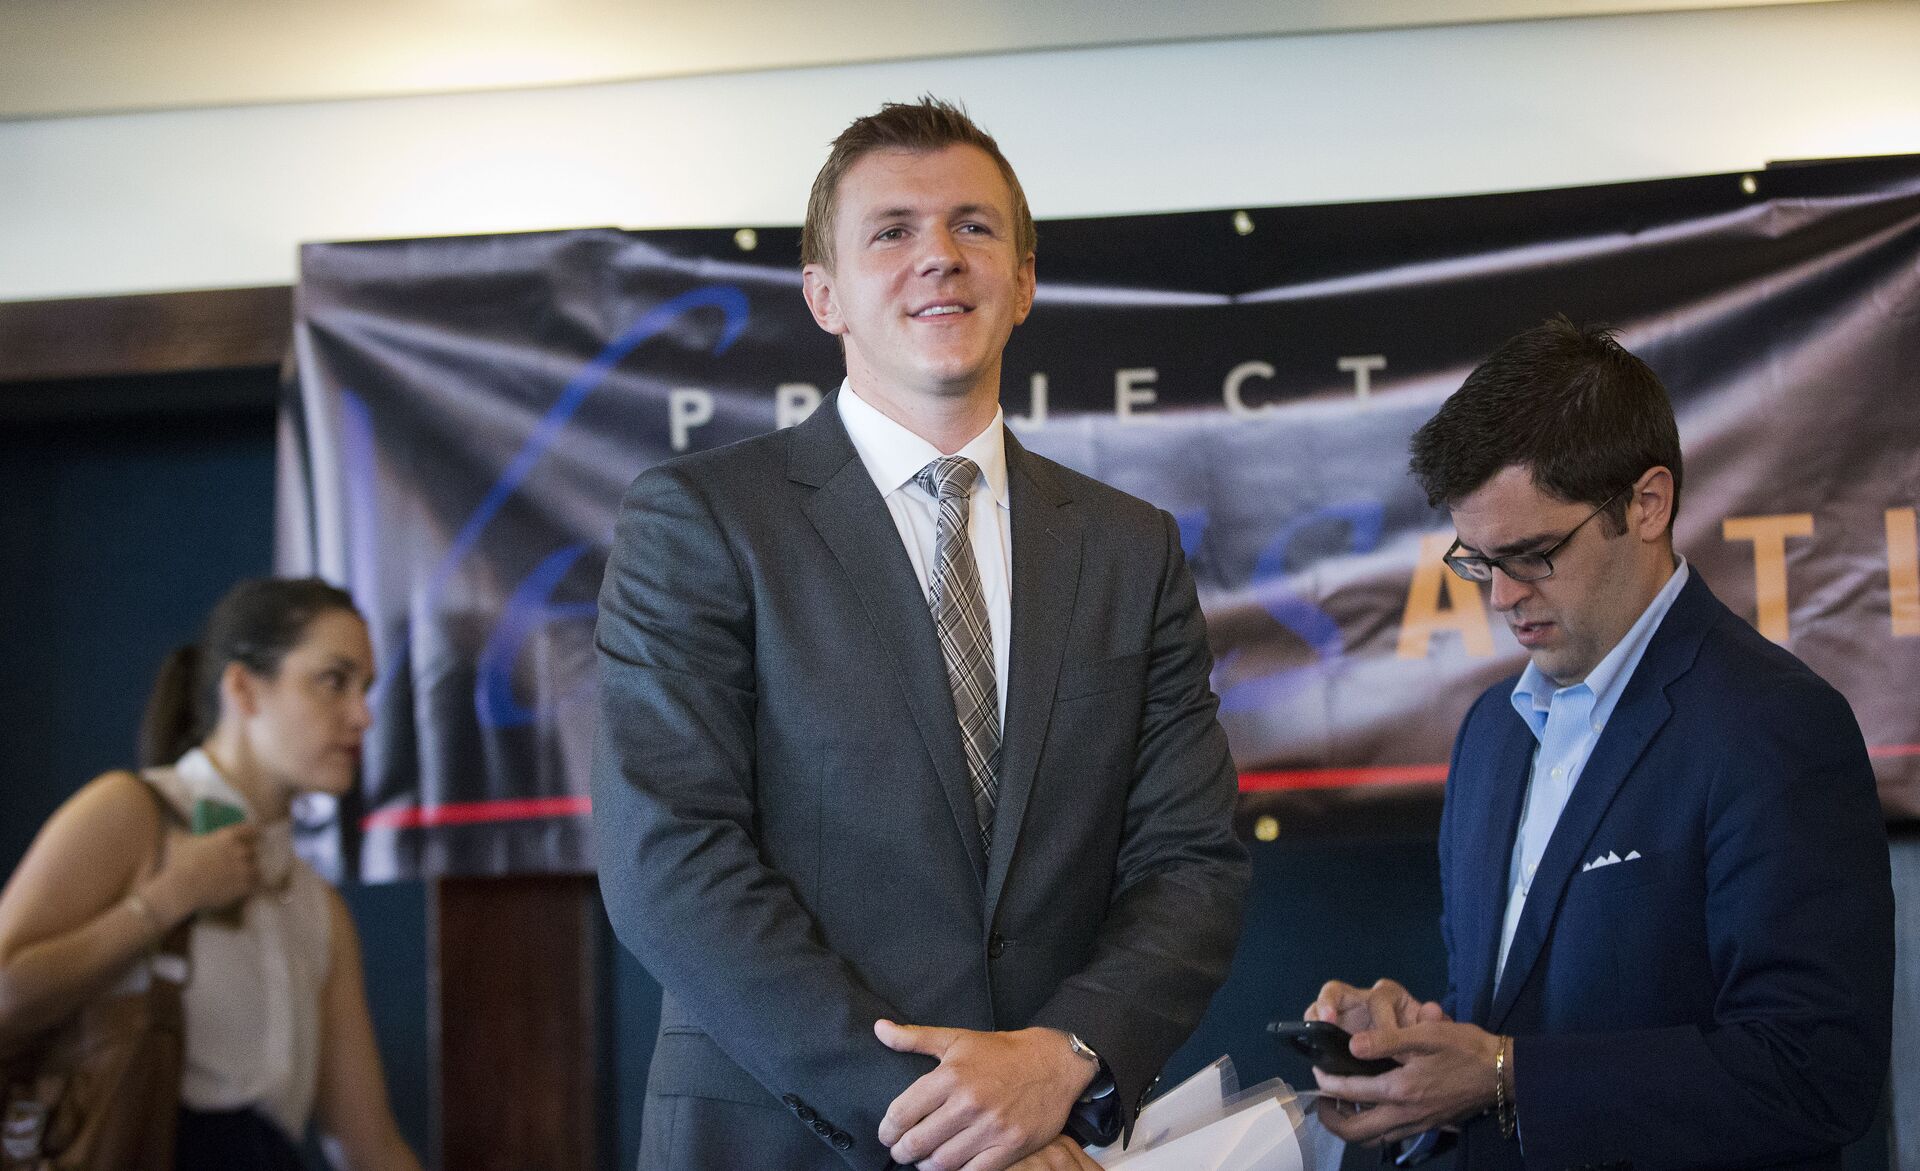 Project Veritas Founder Vows to Sue CNN Amid Campaign to 'Expose' News Network - Sputnik International, 1920, 26.04.2021